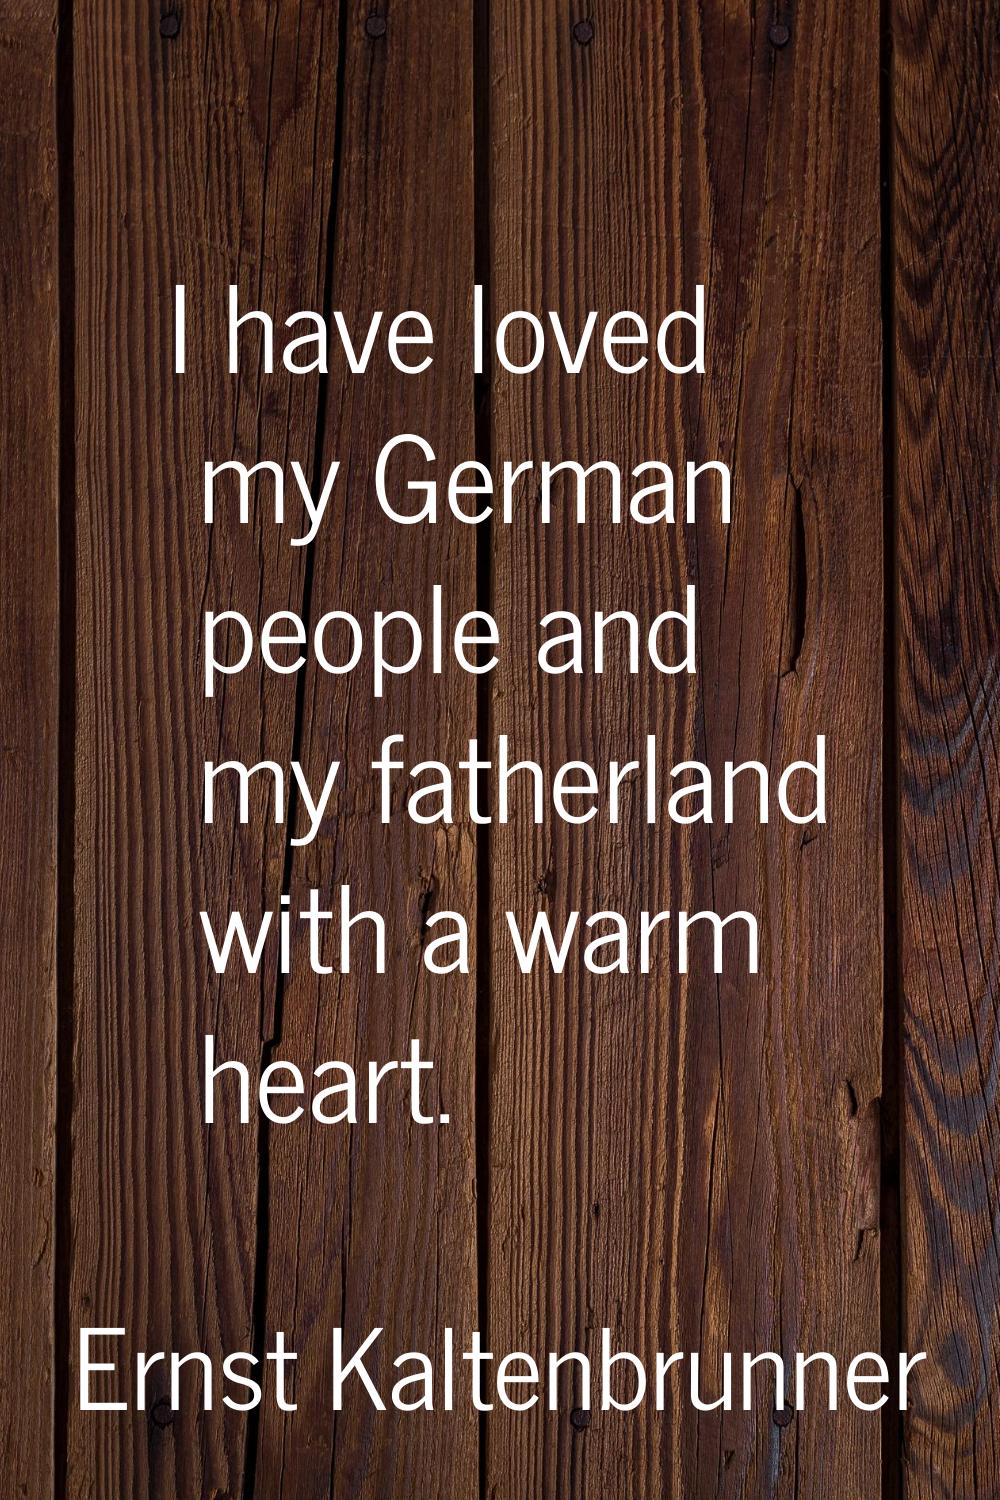 I have loved my German people and my fatherland with a warm heart.